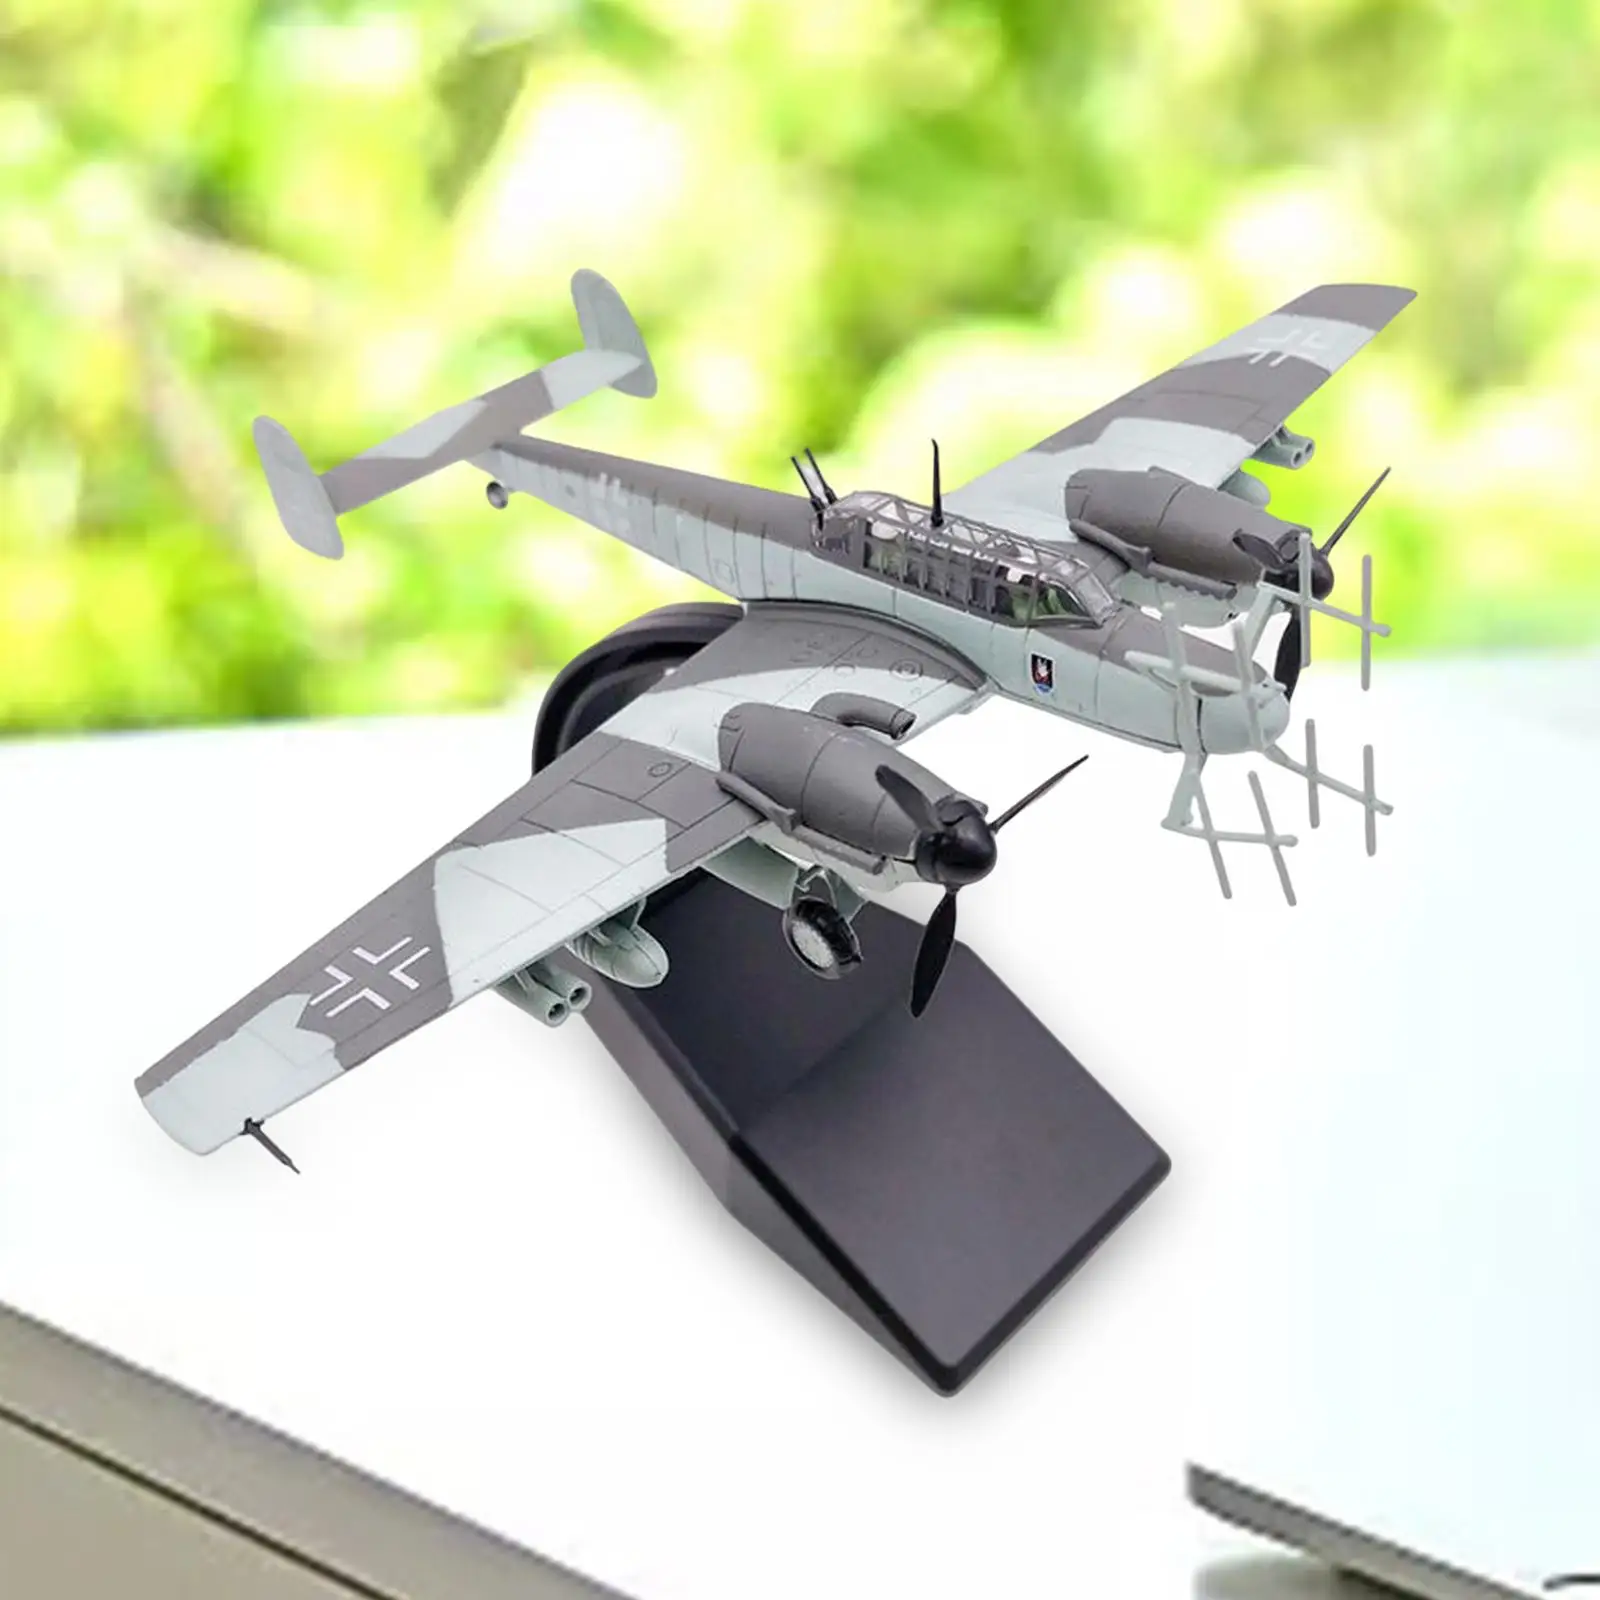 1/100 Scale BF-110 Fighter Model Toy with Stand Display Model Home Accessory